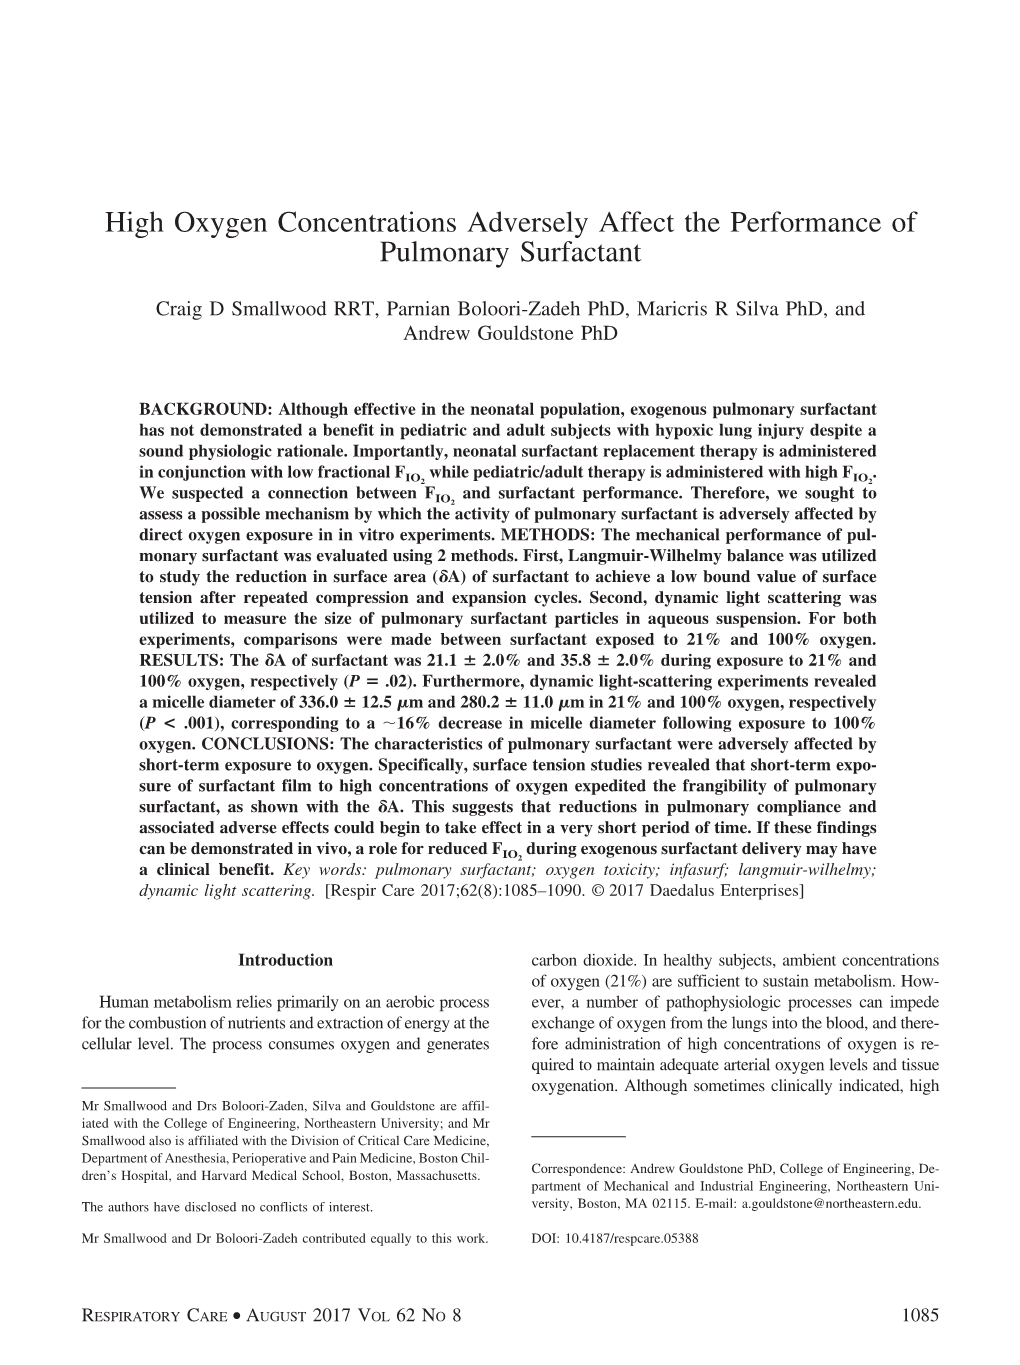 High Oxygen Concentrations Adversely Affect the Performance of Pulmonary Surfactant